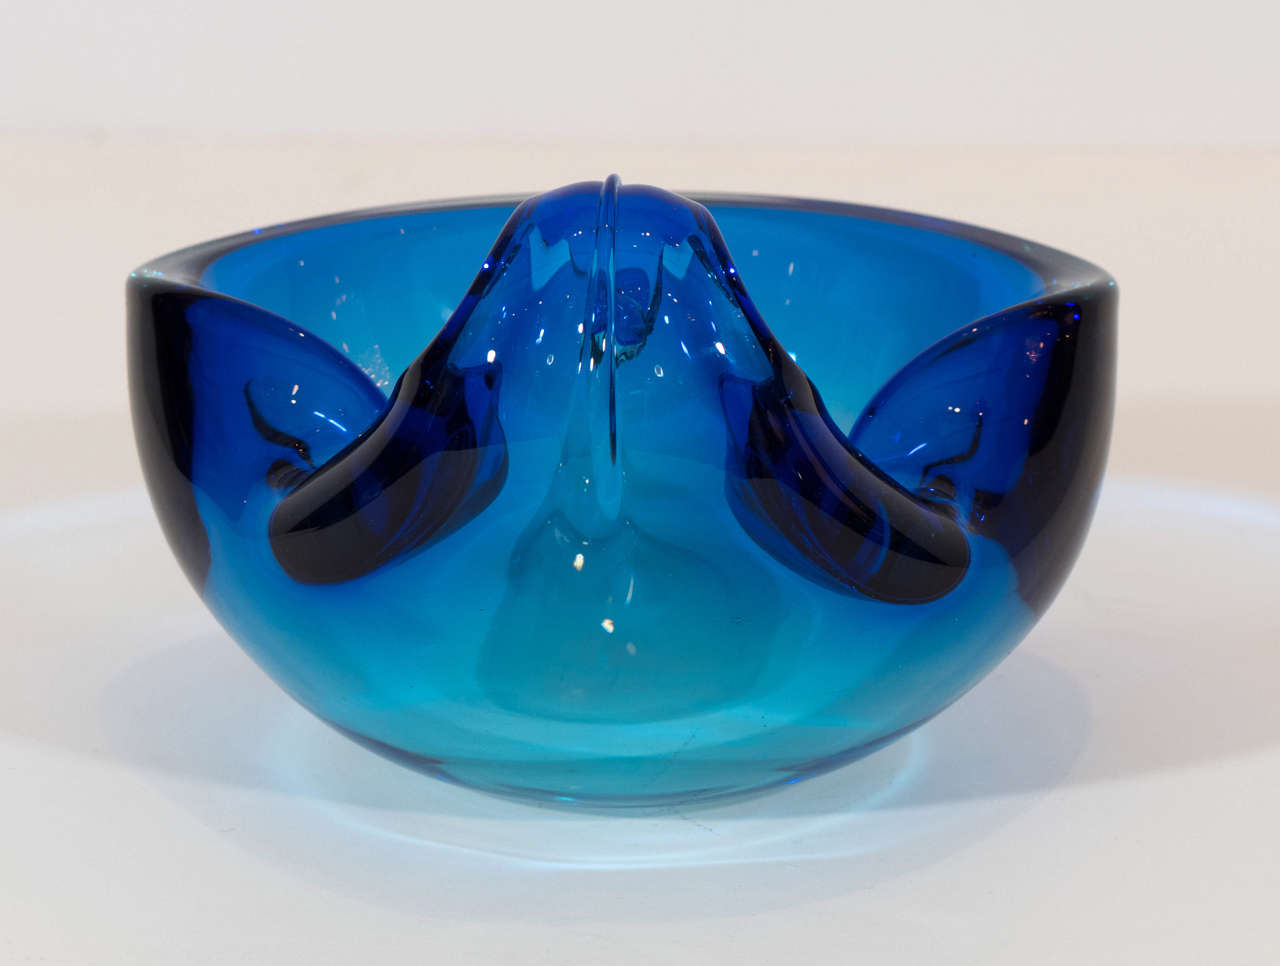 A lovely Murano bowl, beautifully formed in a jewel like color. Please contact for location.